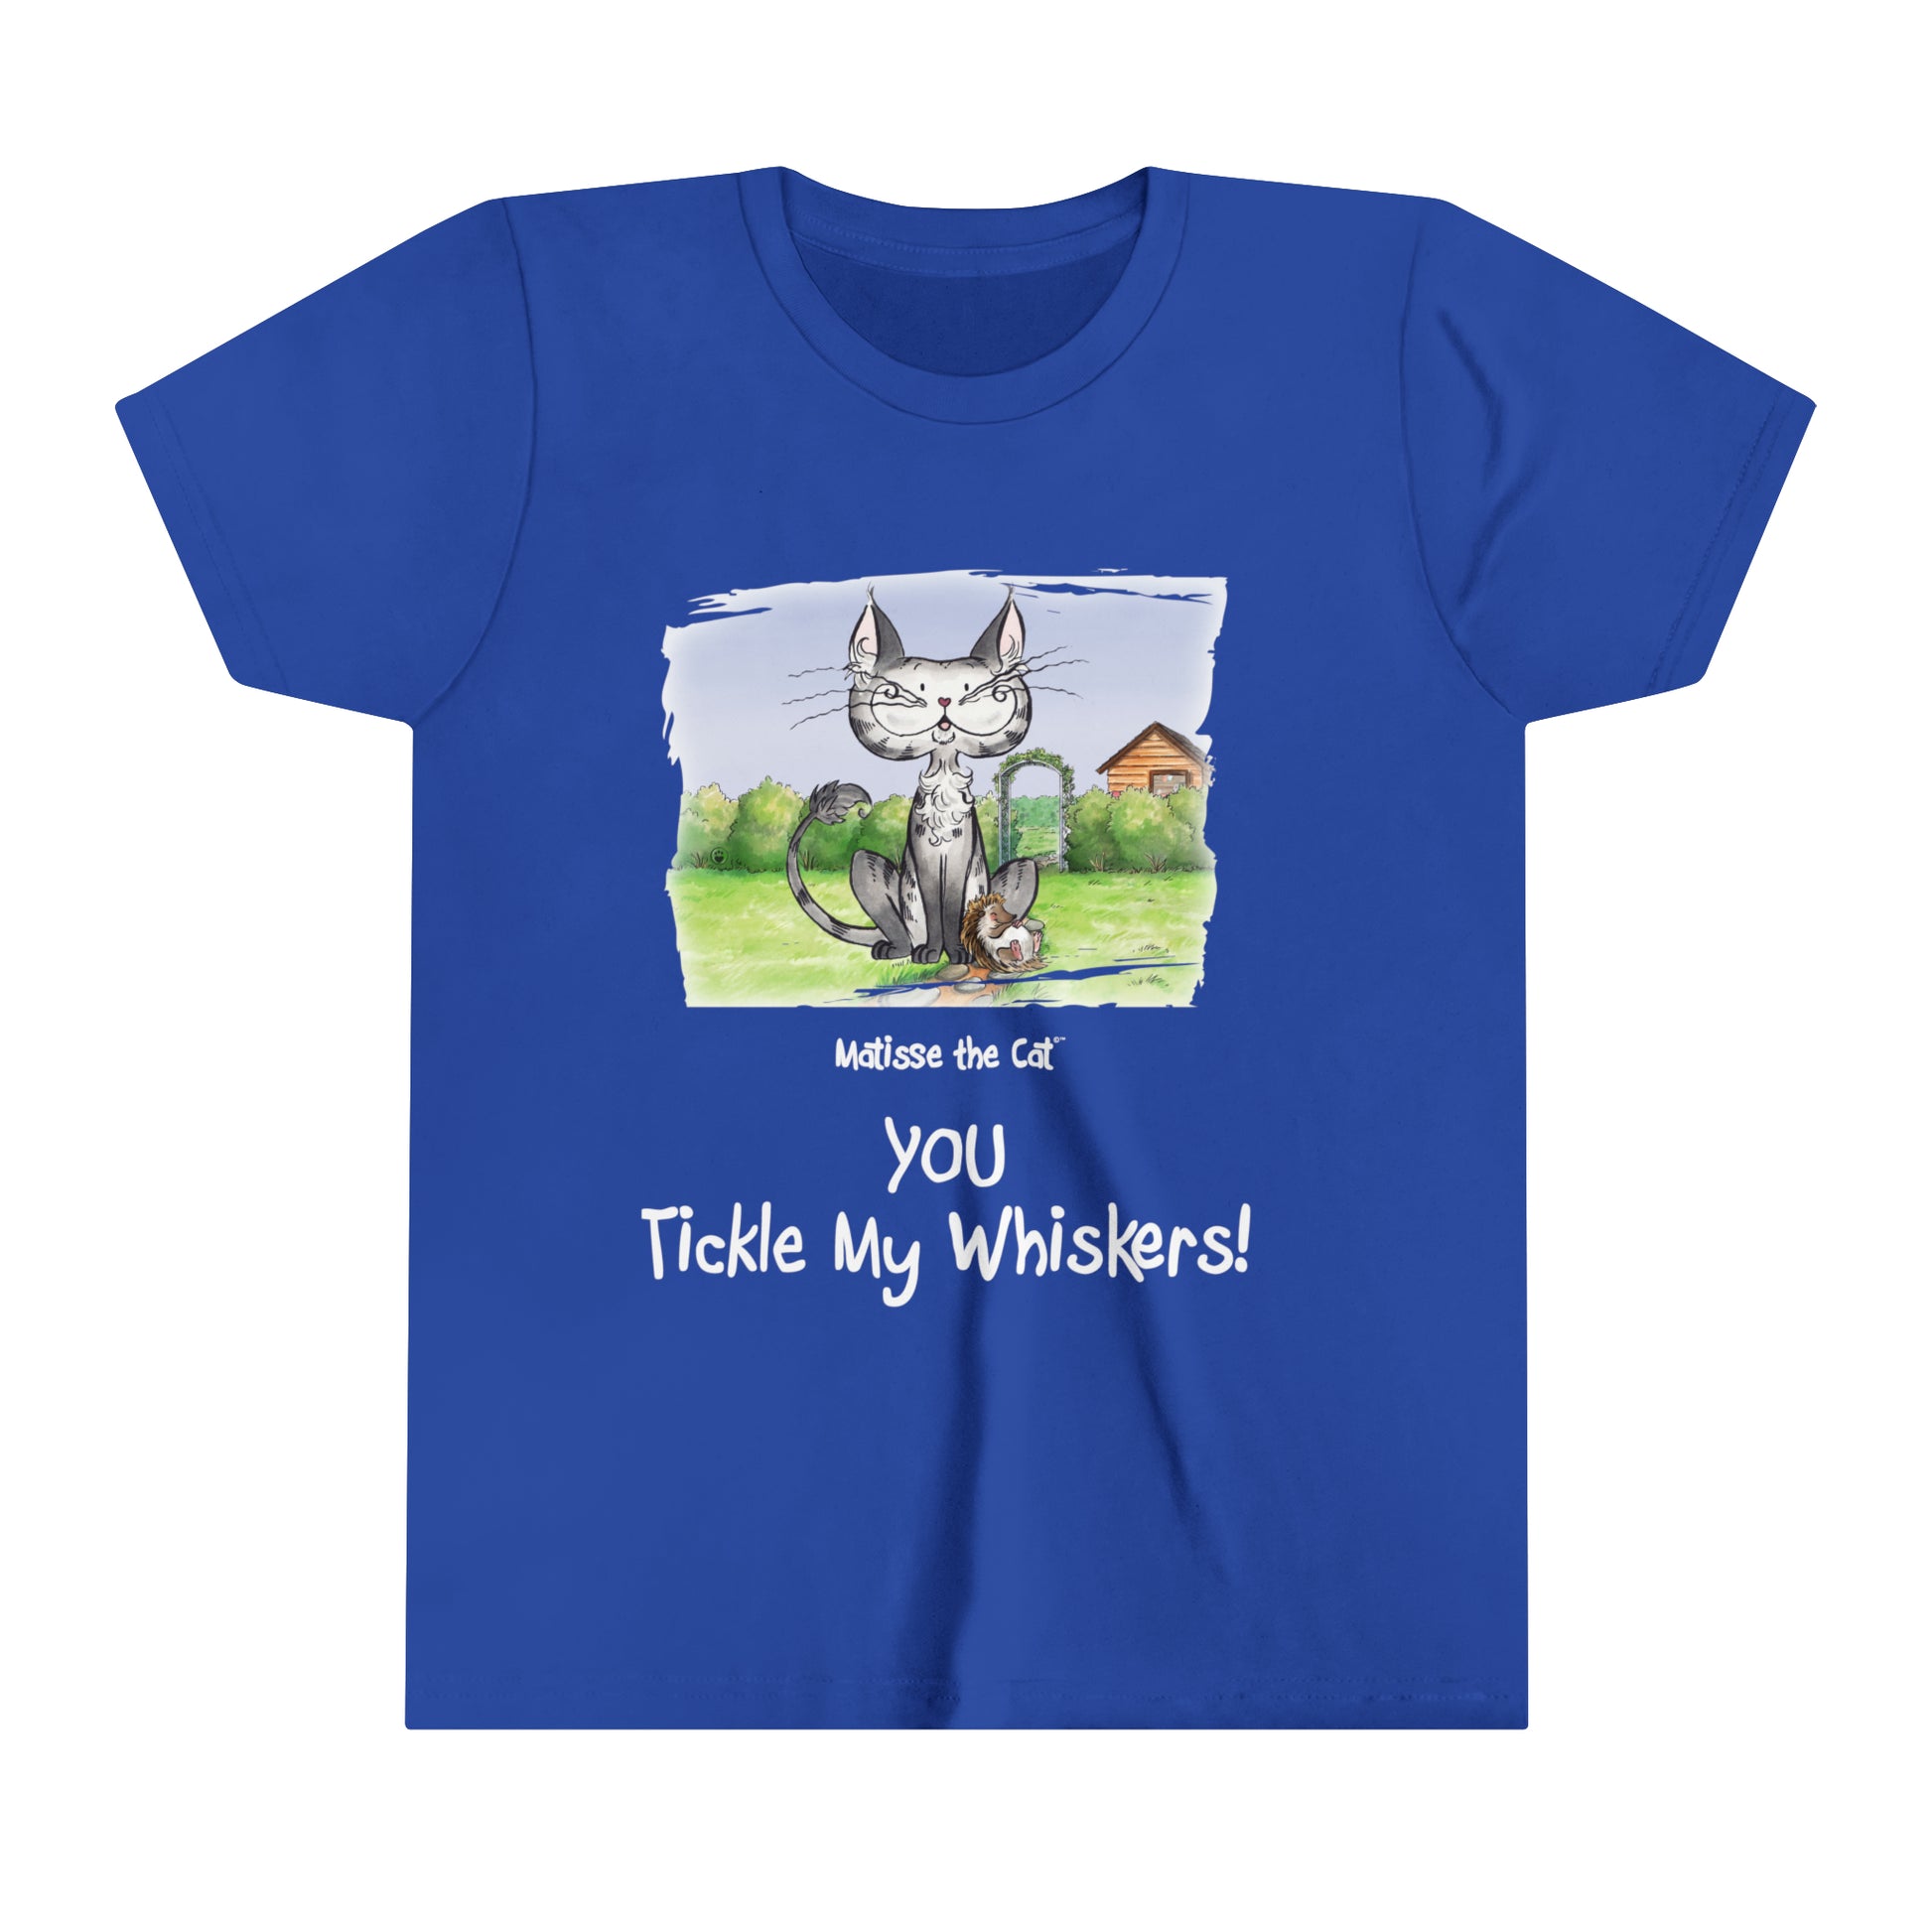 A true blue official, Matisse the Cat children’s t-shirt with the slogan ‘YOU Tickle My Whiskers ‘ showcases Matisse sitting in his garden smiling with a sleeping hedgehog curled up beside him resting on his leg. 